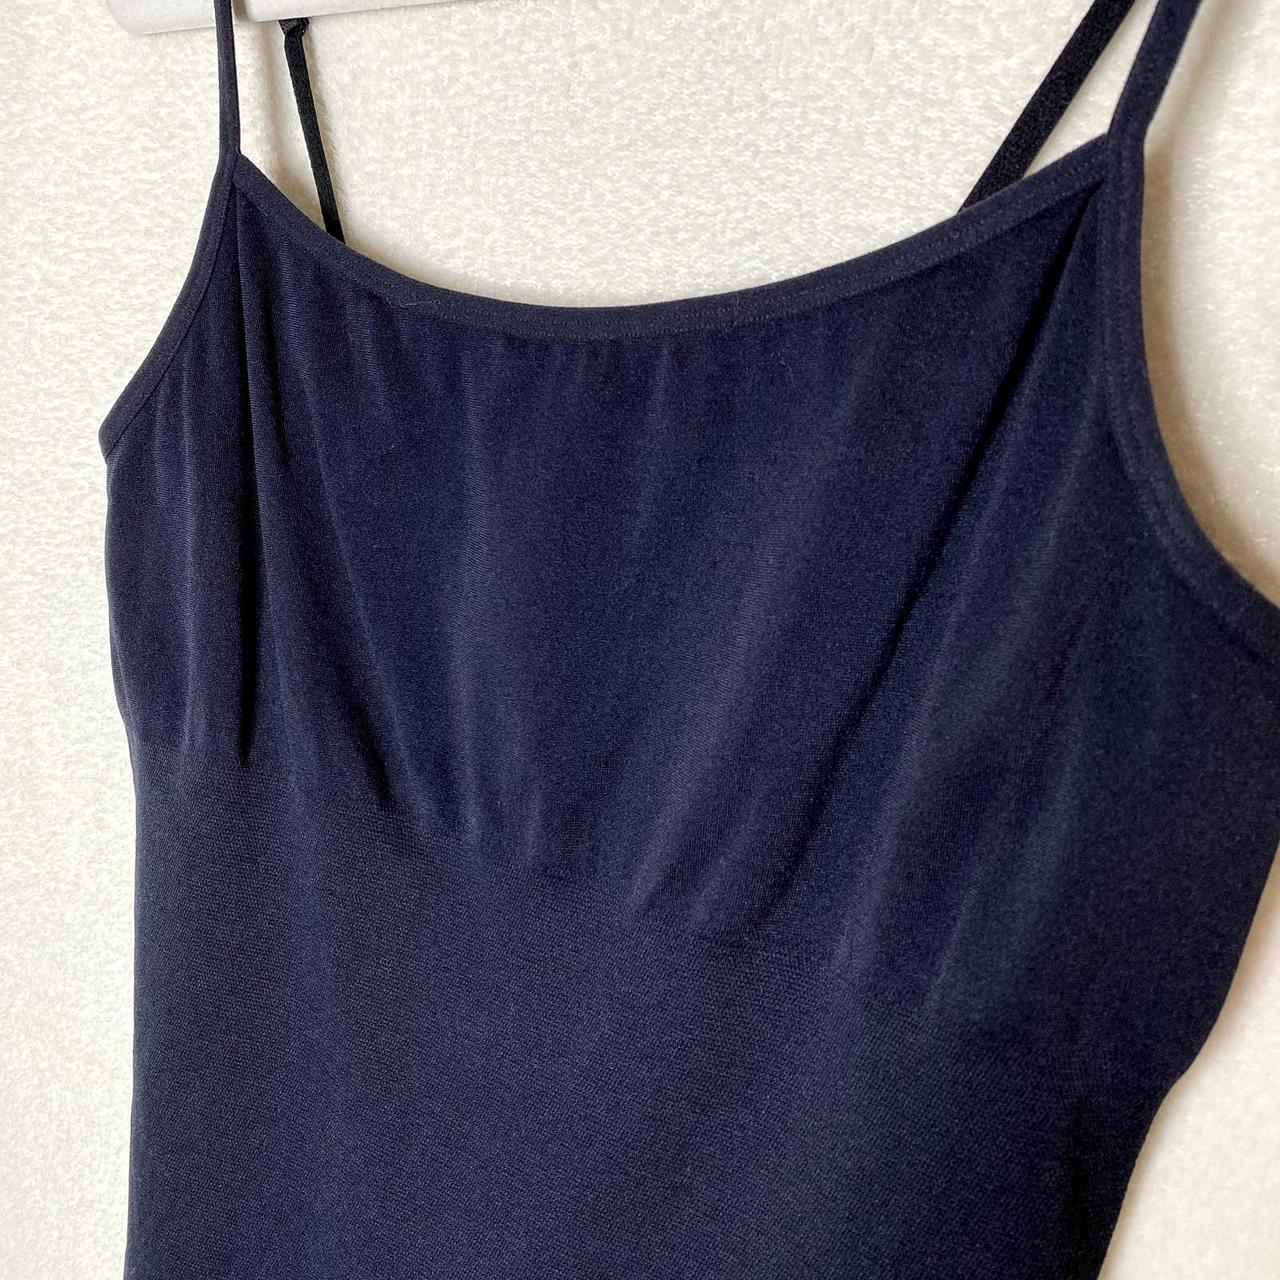 Yummie by Heather Thomson Seamless Camisole Top. New